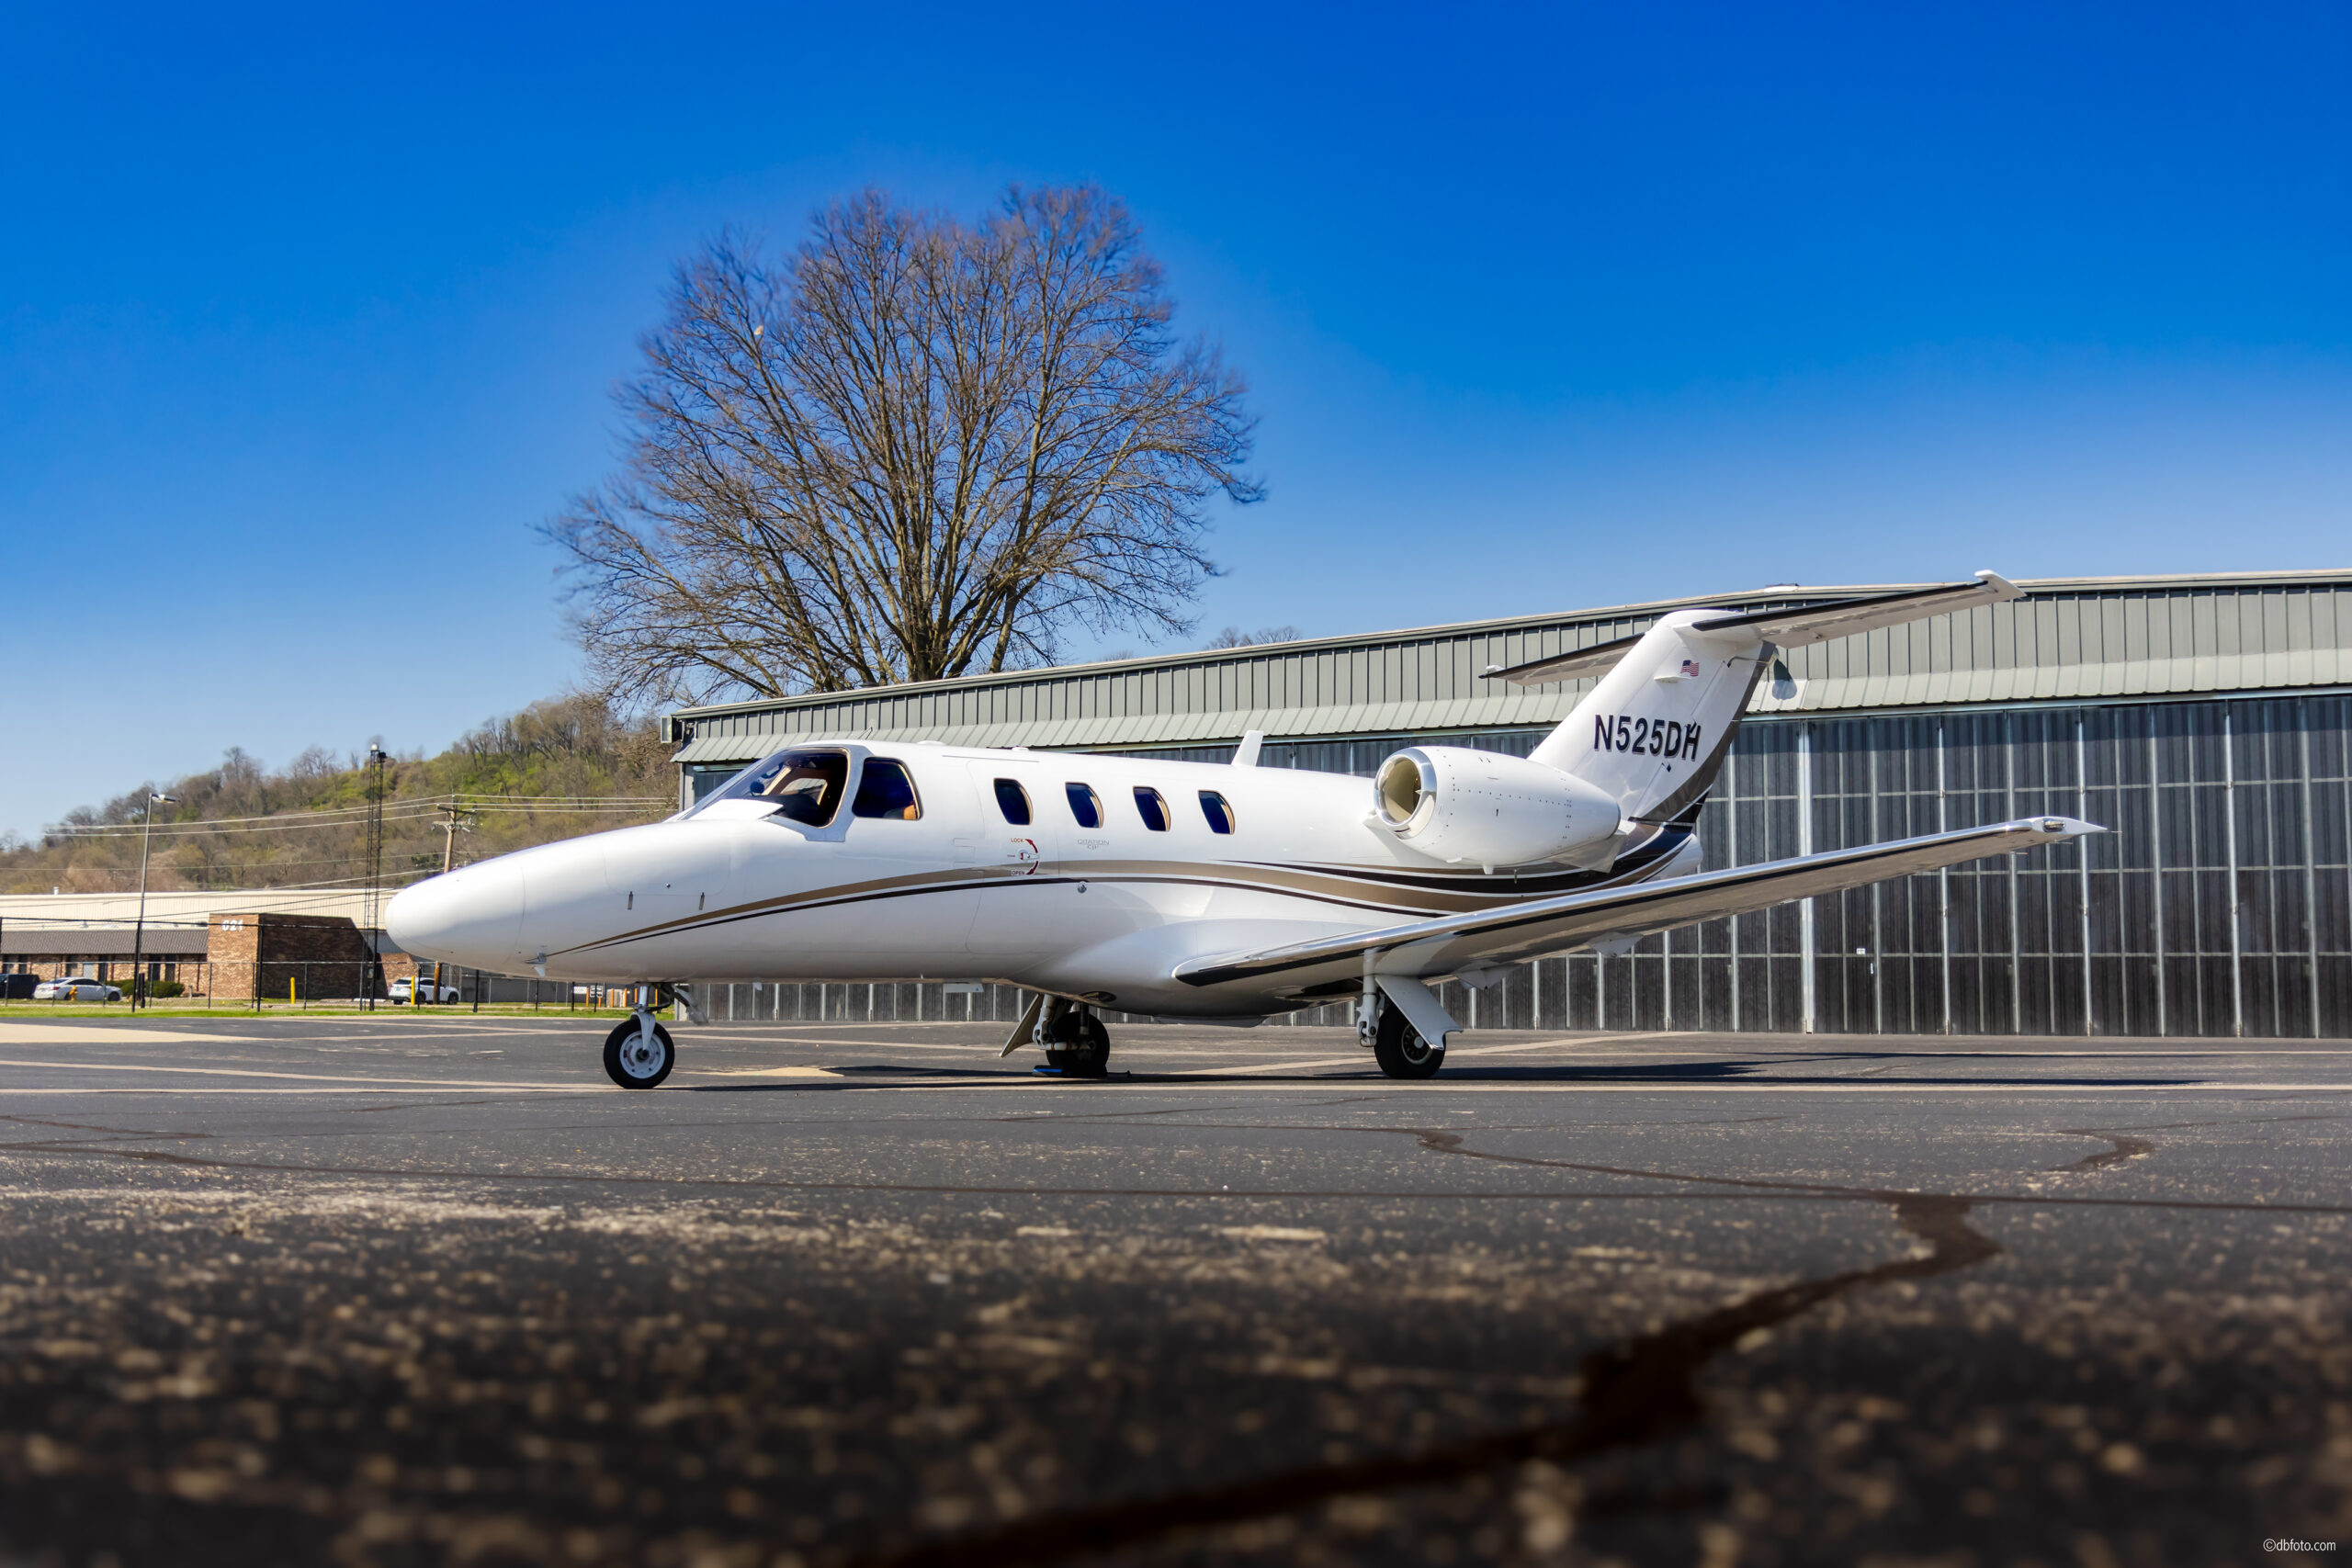 2011 Citation CJ1+ Private Jet For Sale (N525DH) From jetAVIVA On AvPay aircraft exterior front left